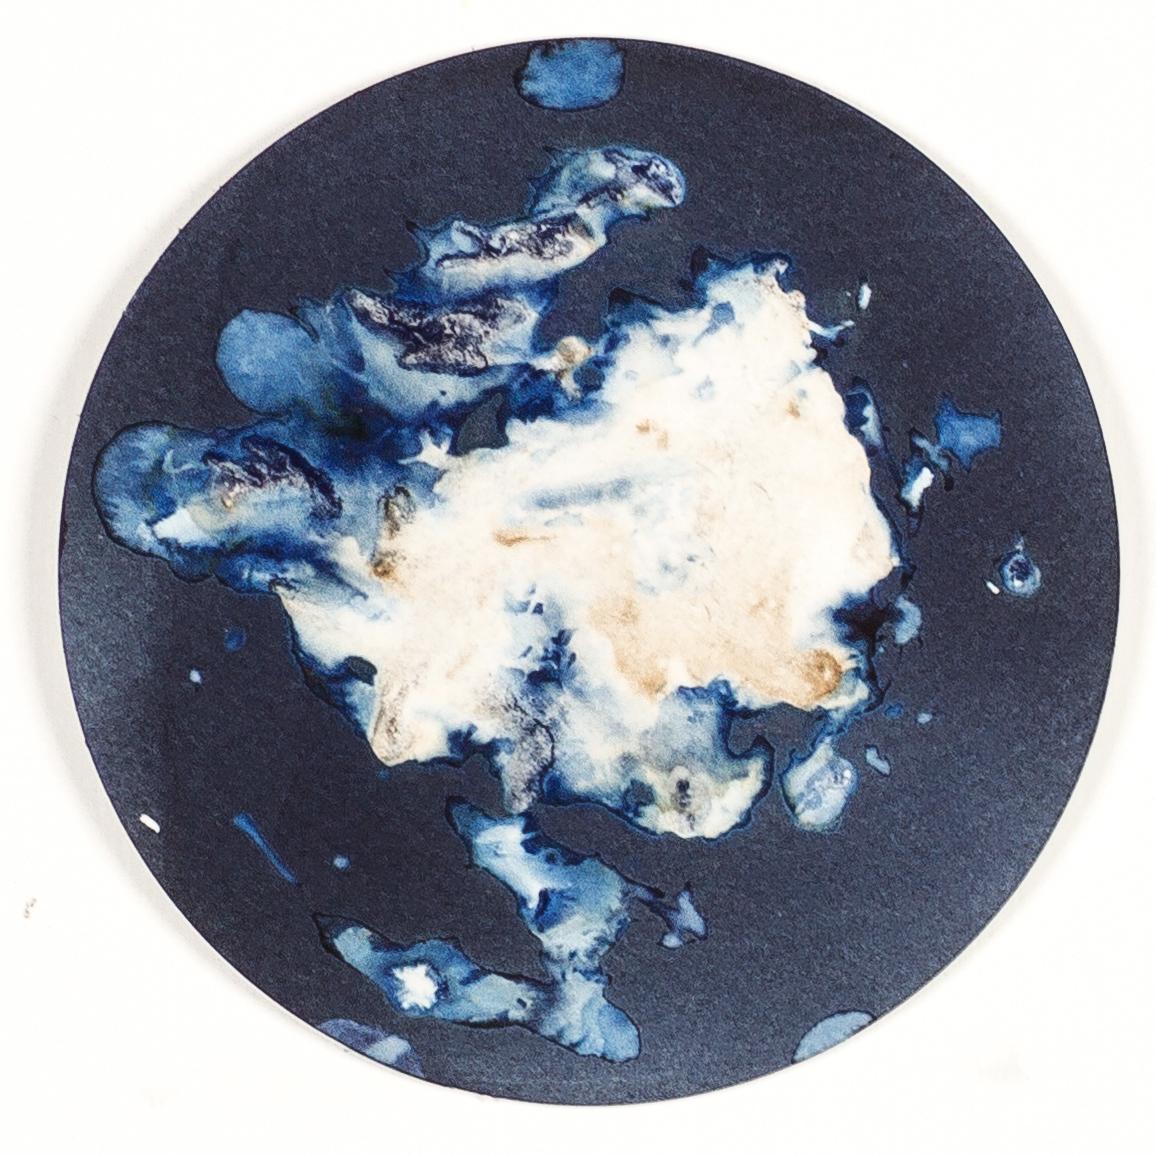 Algas 88, 28, 87. Cyanotype photograhs mounted in high resistance glass dish For Sale 3